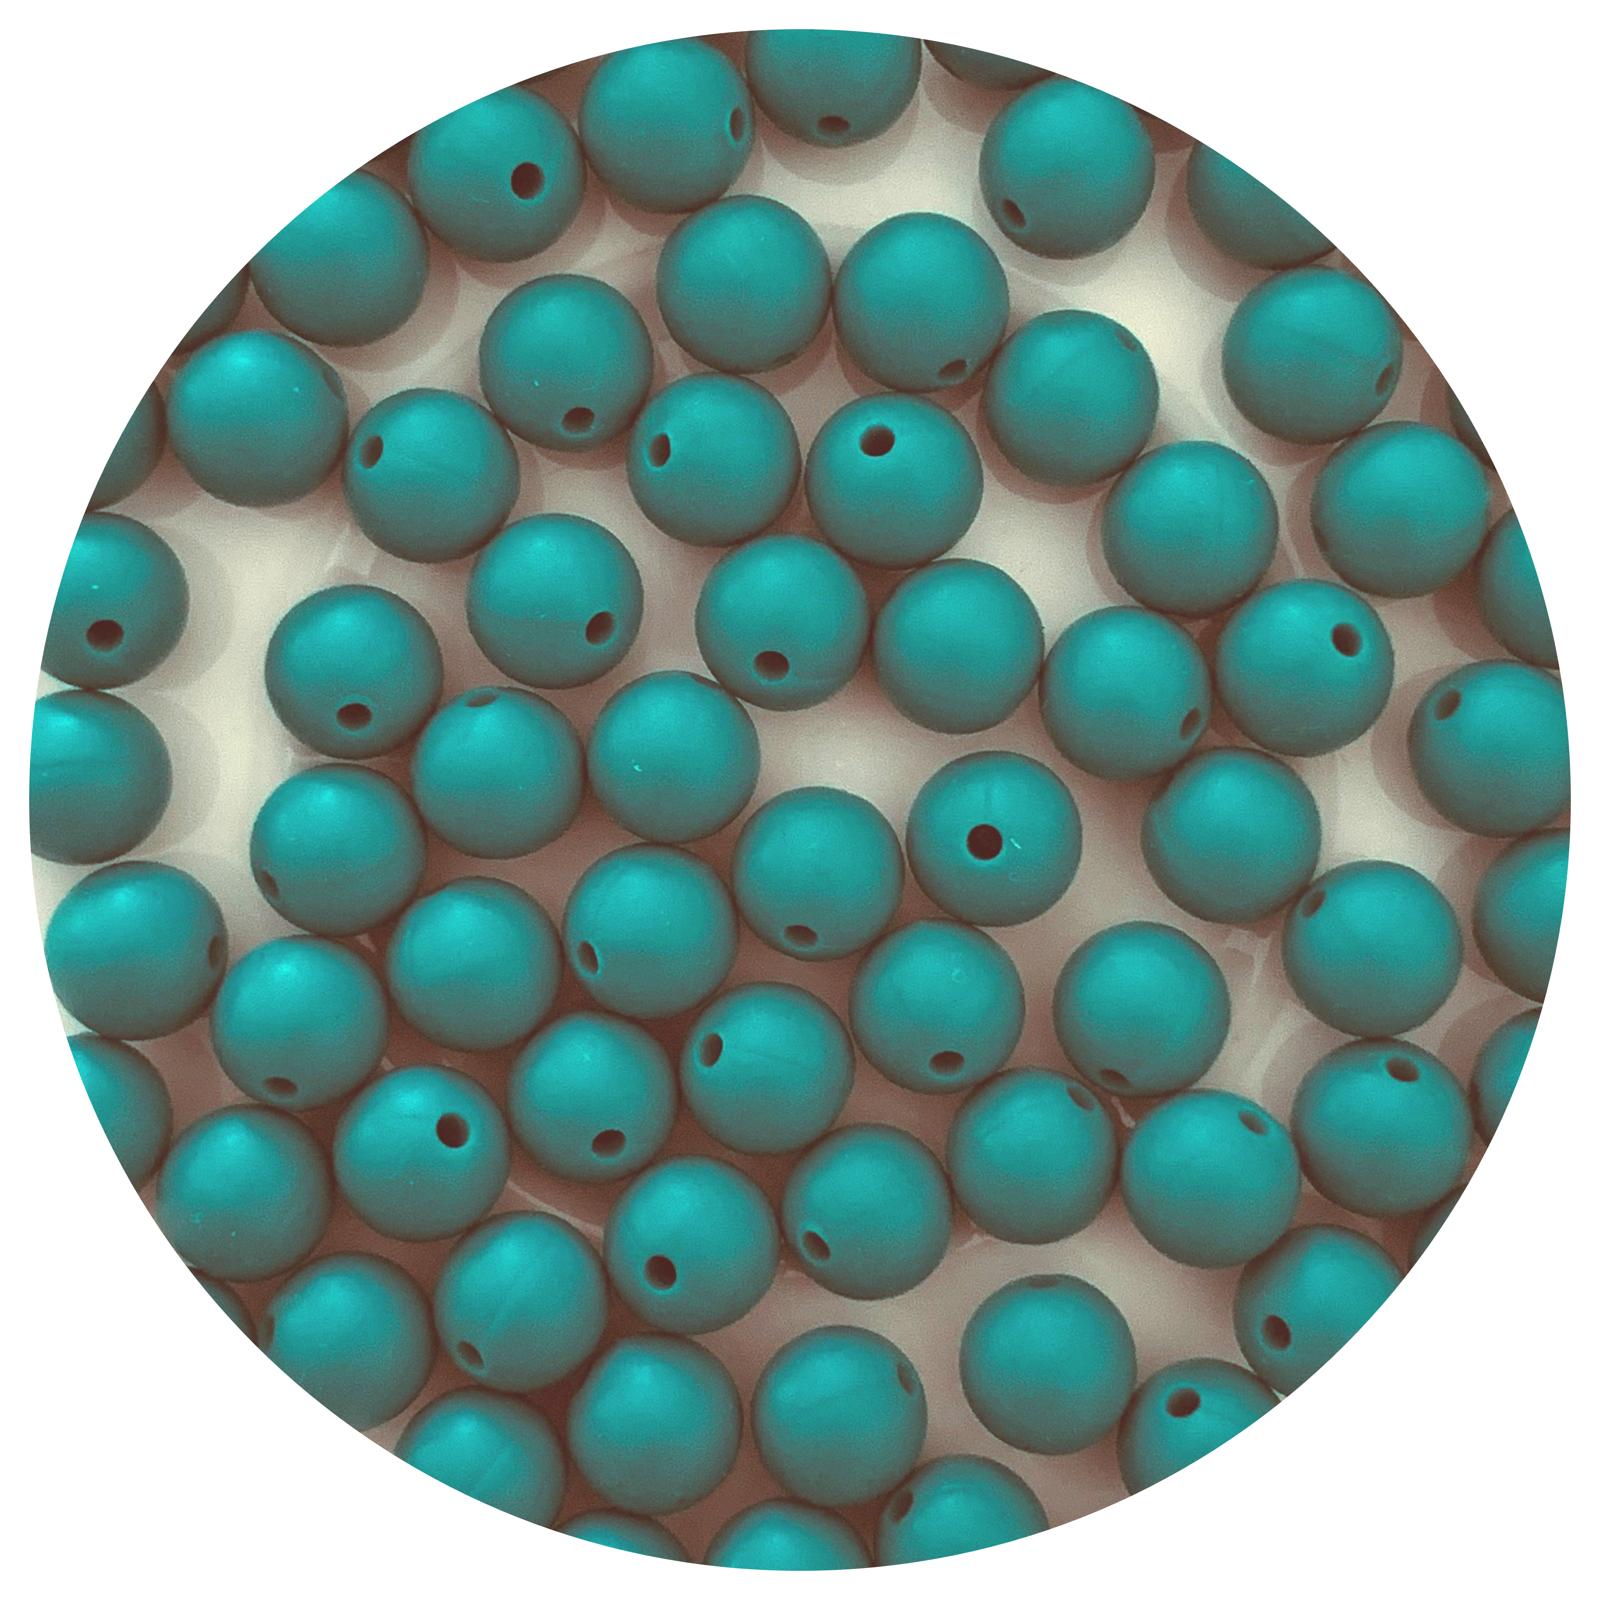 Ocean Green - 9mm Round Silicone Beads - 5 Beads